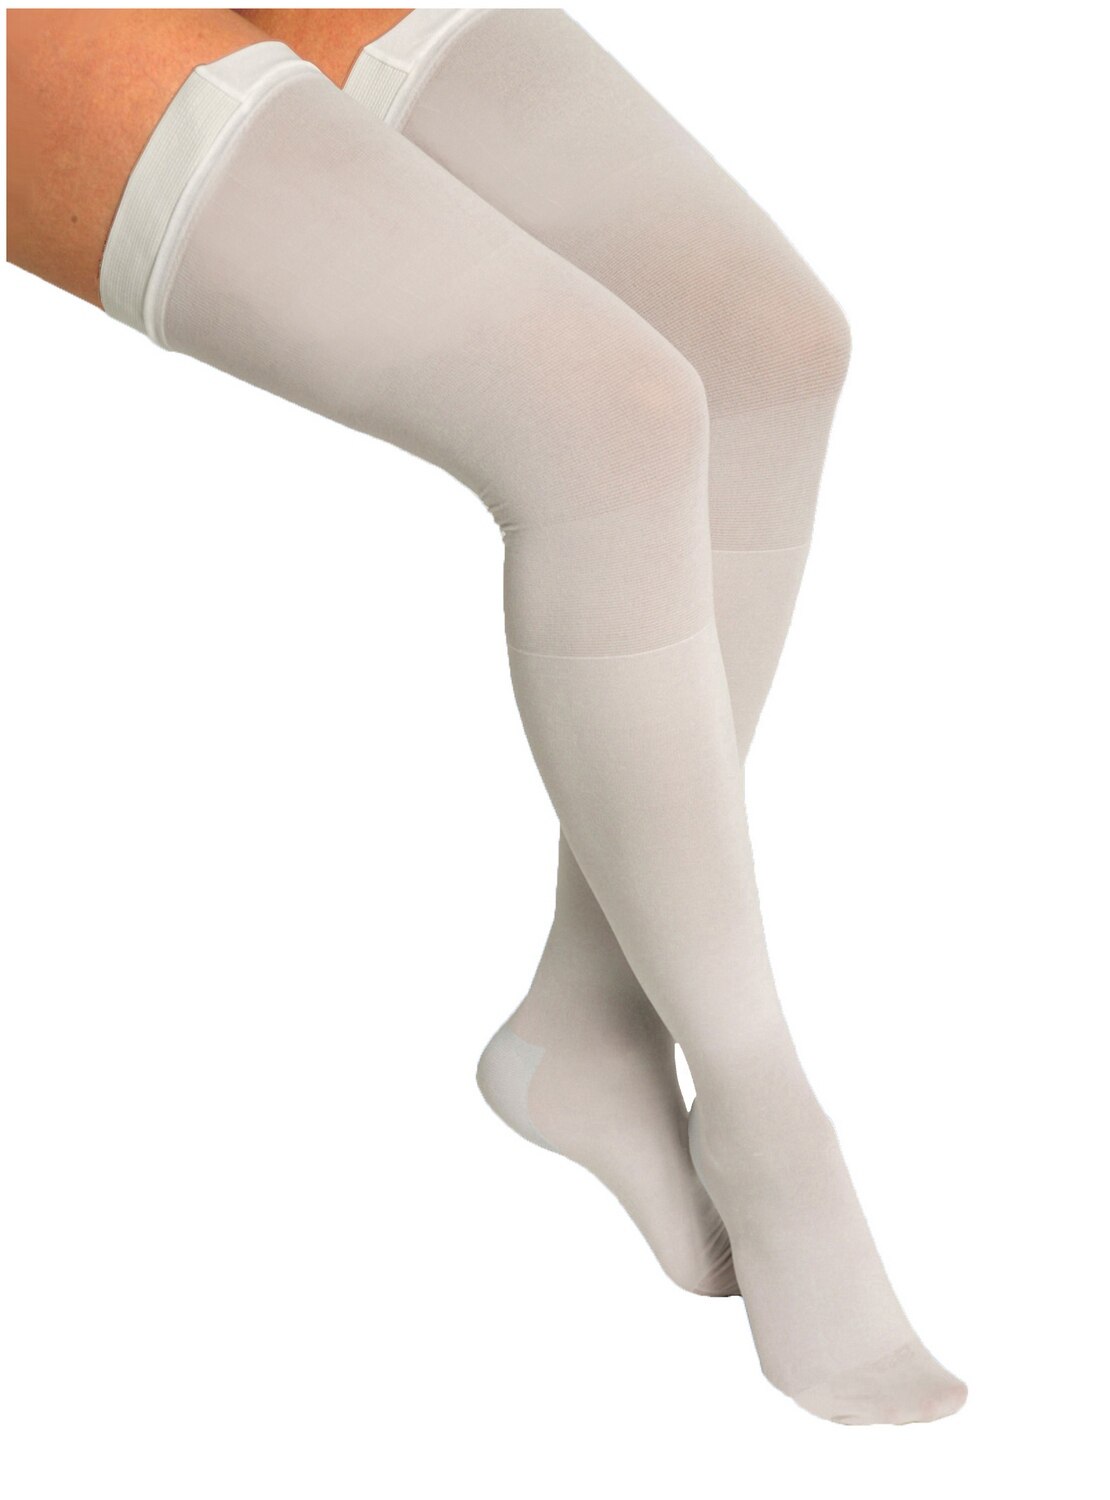 ITA-MED Anti-Embolism Compression Thigh Highs White